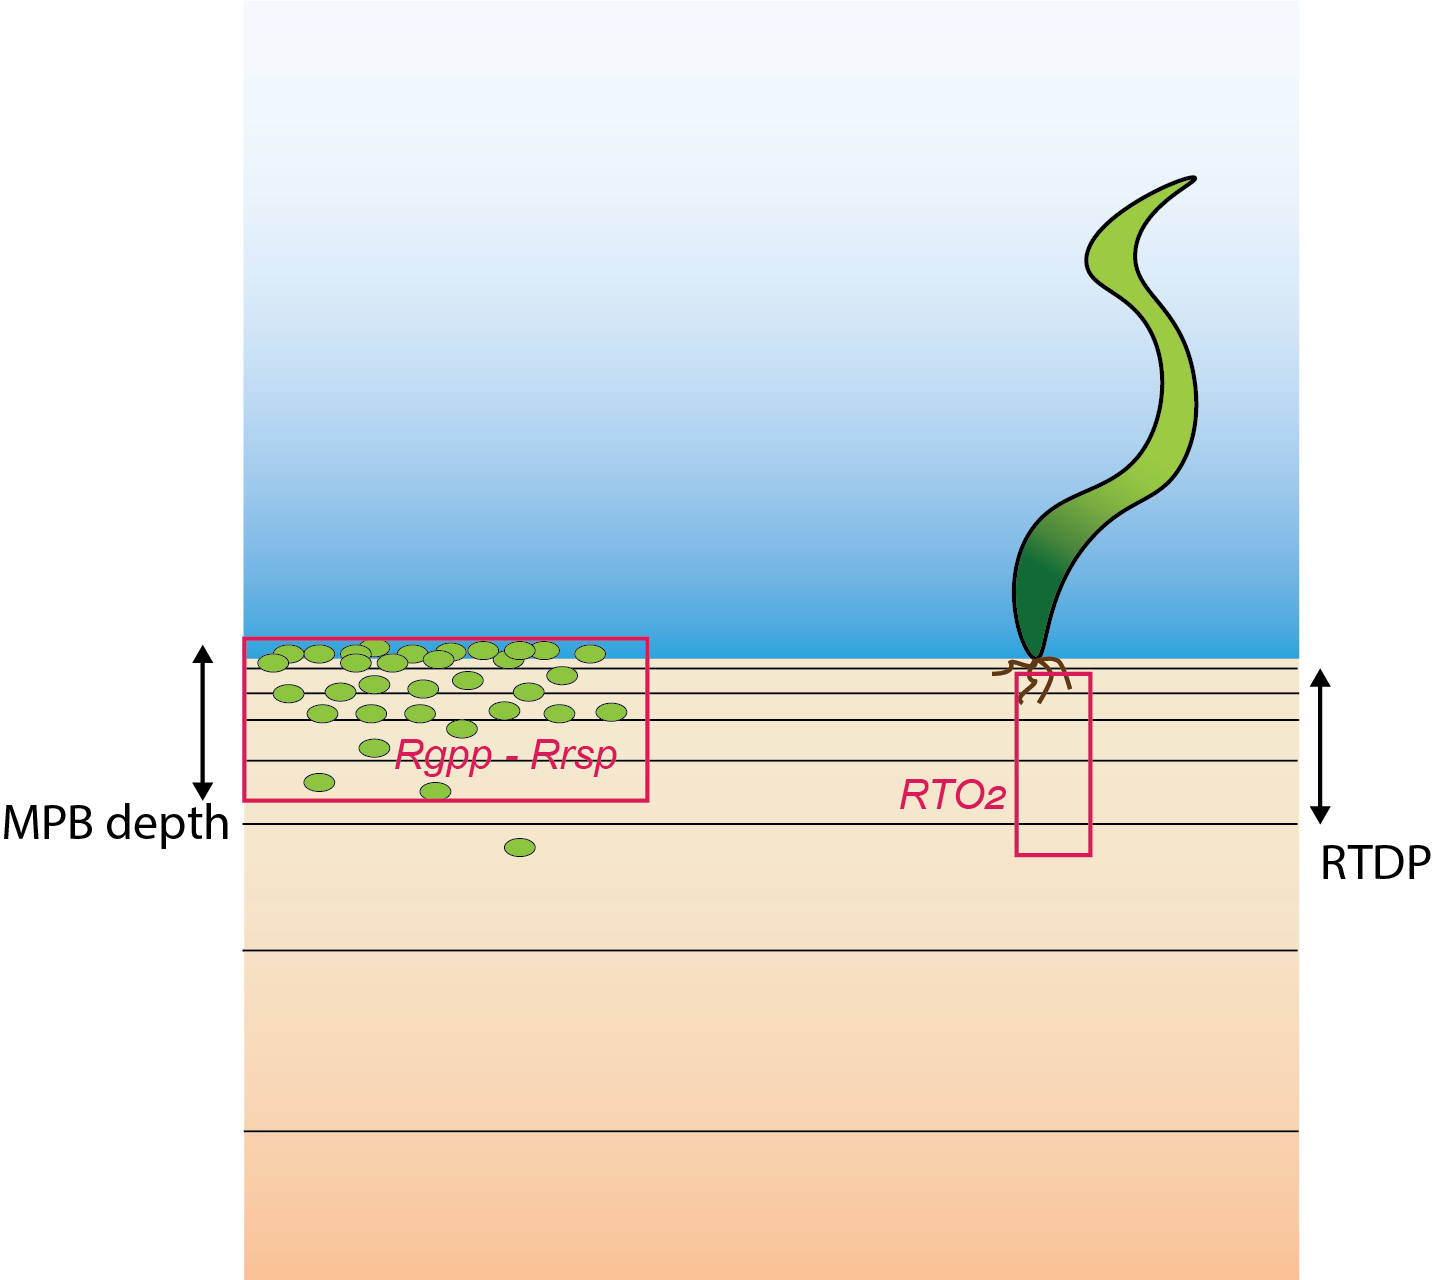 Schematic of the new parameterisation of $O_2$ injection into the sediment. Left: $O_2$ is released where $MPB$ are respiring. Right: $O_2$ comes from plant roots to the depth of *RTDP*.